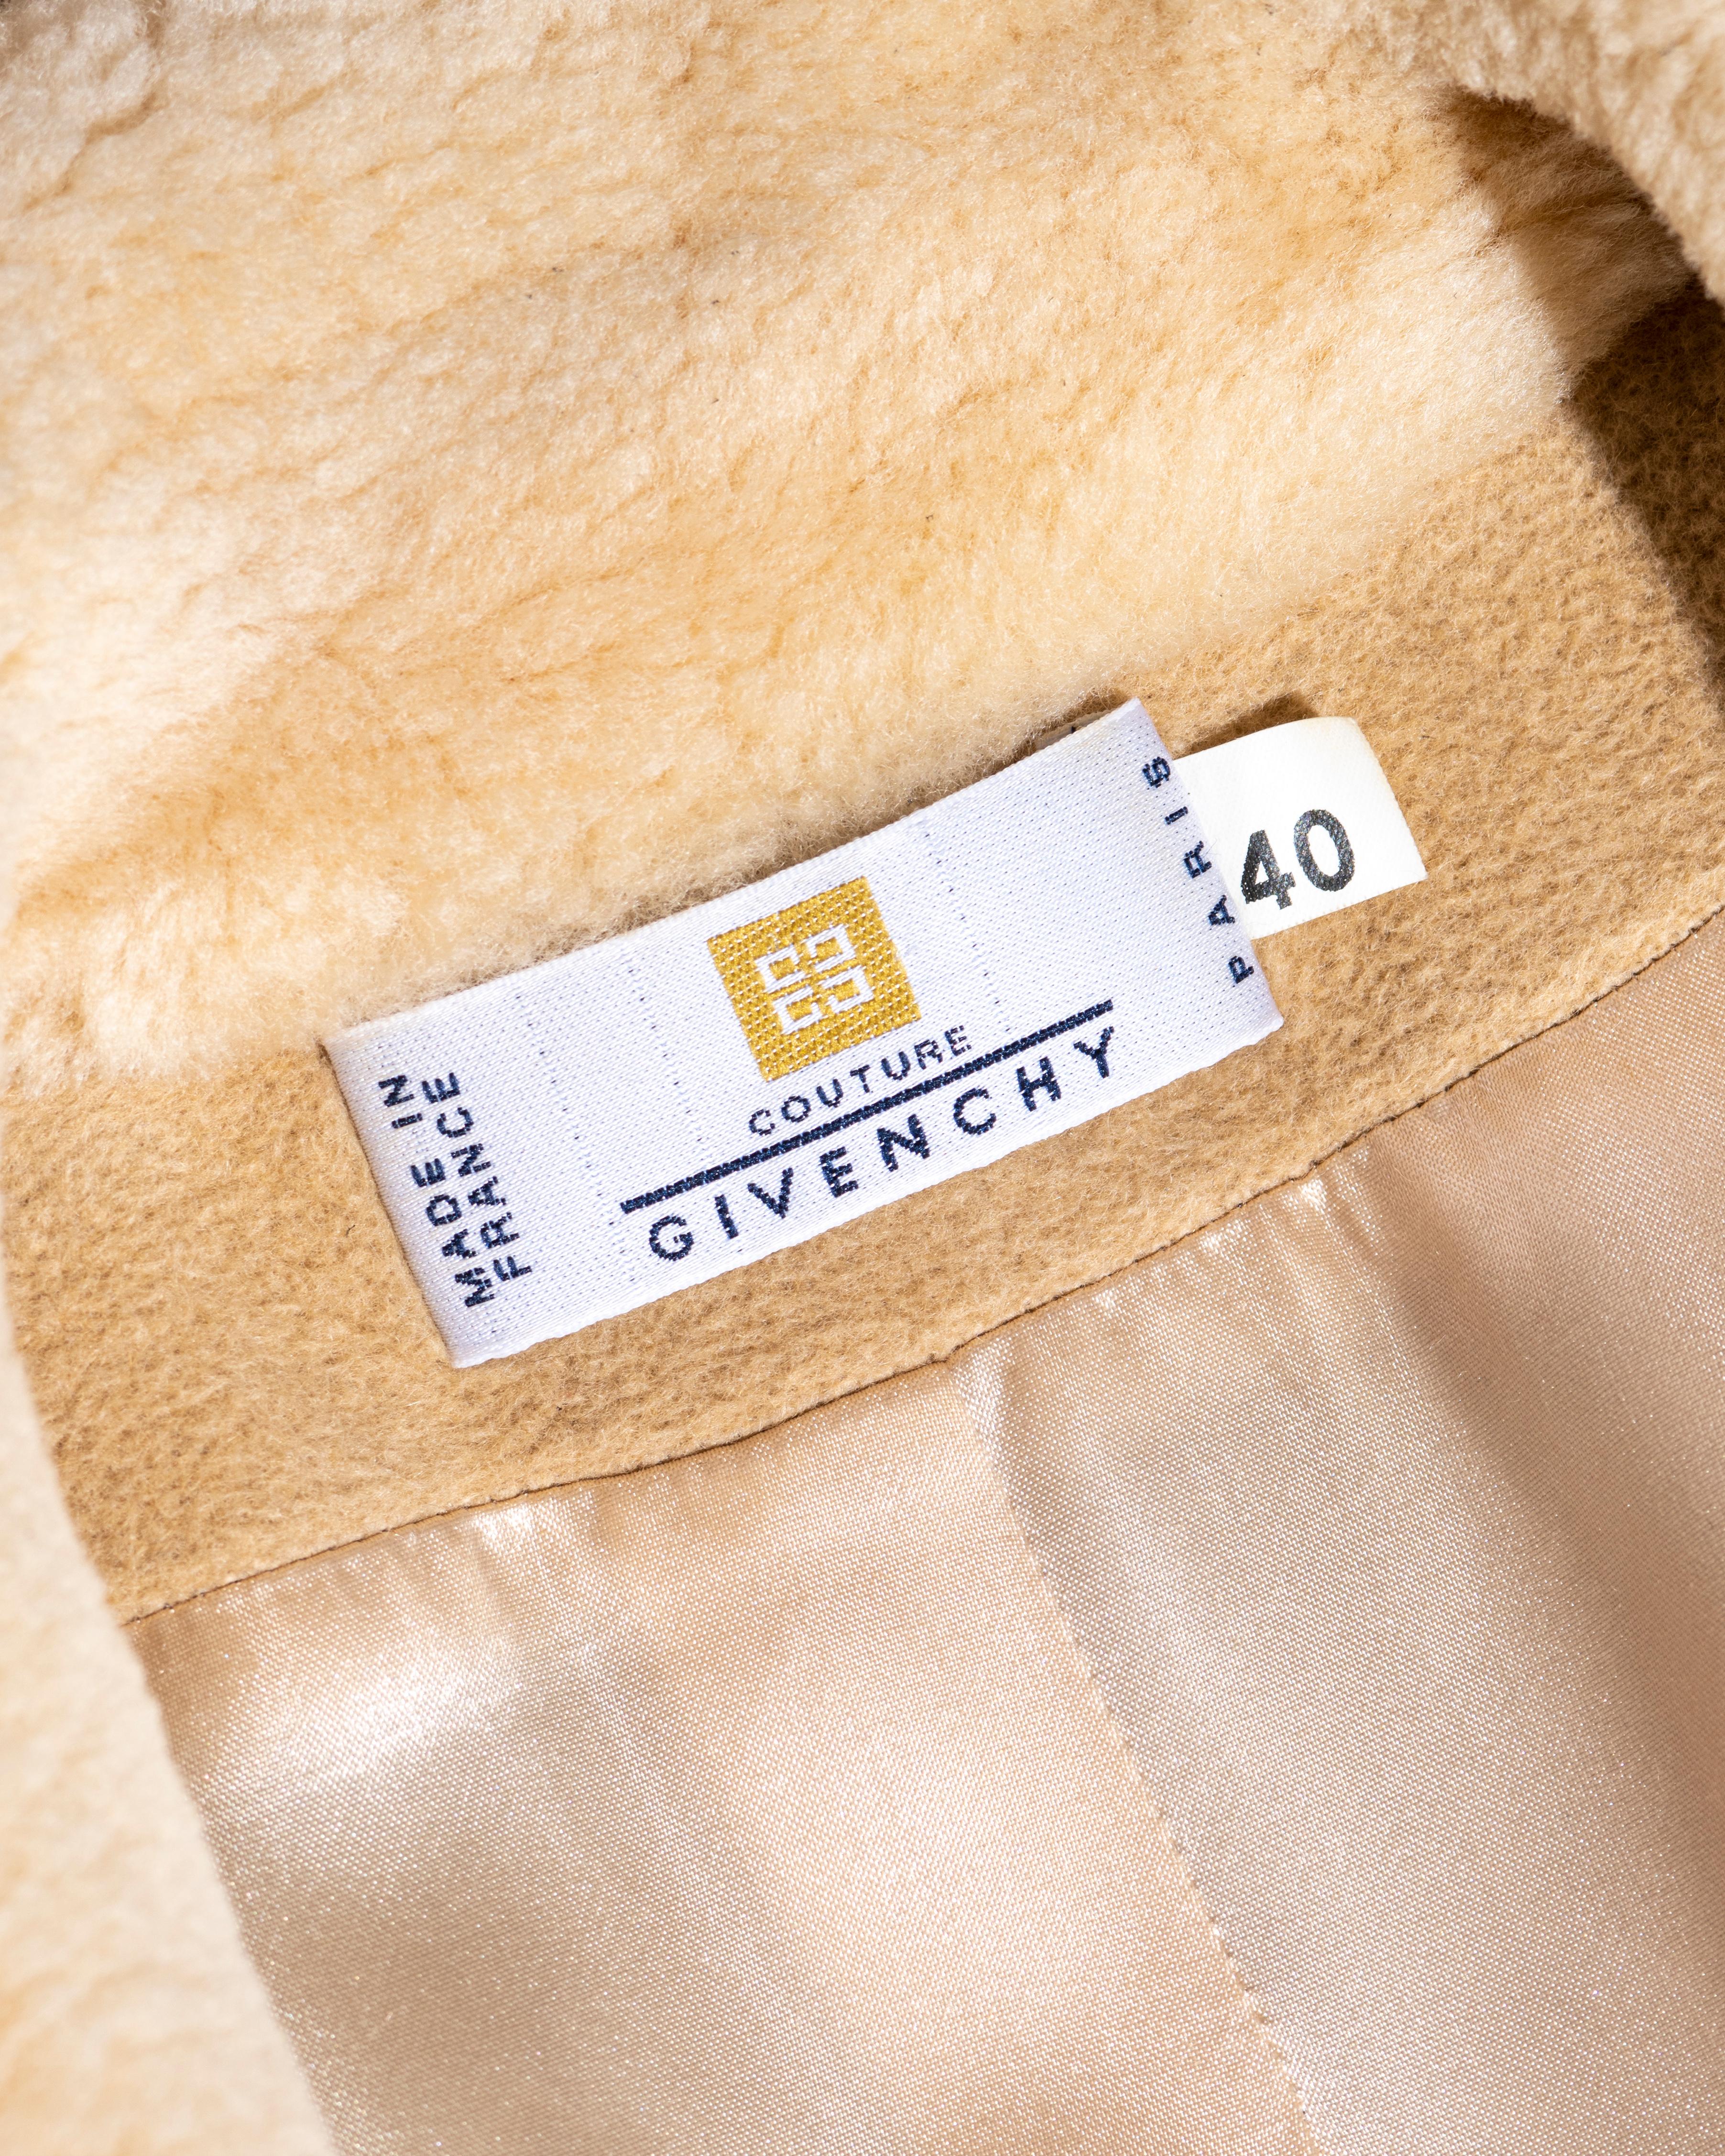 Givenchy by Alexander McQueen beige angora wool and shearling coat, c. 1999-2001 For Sale 1